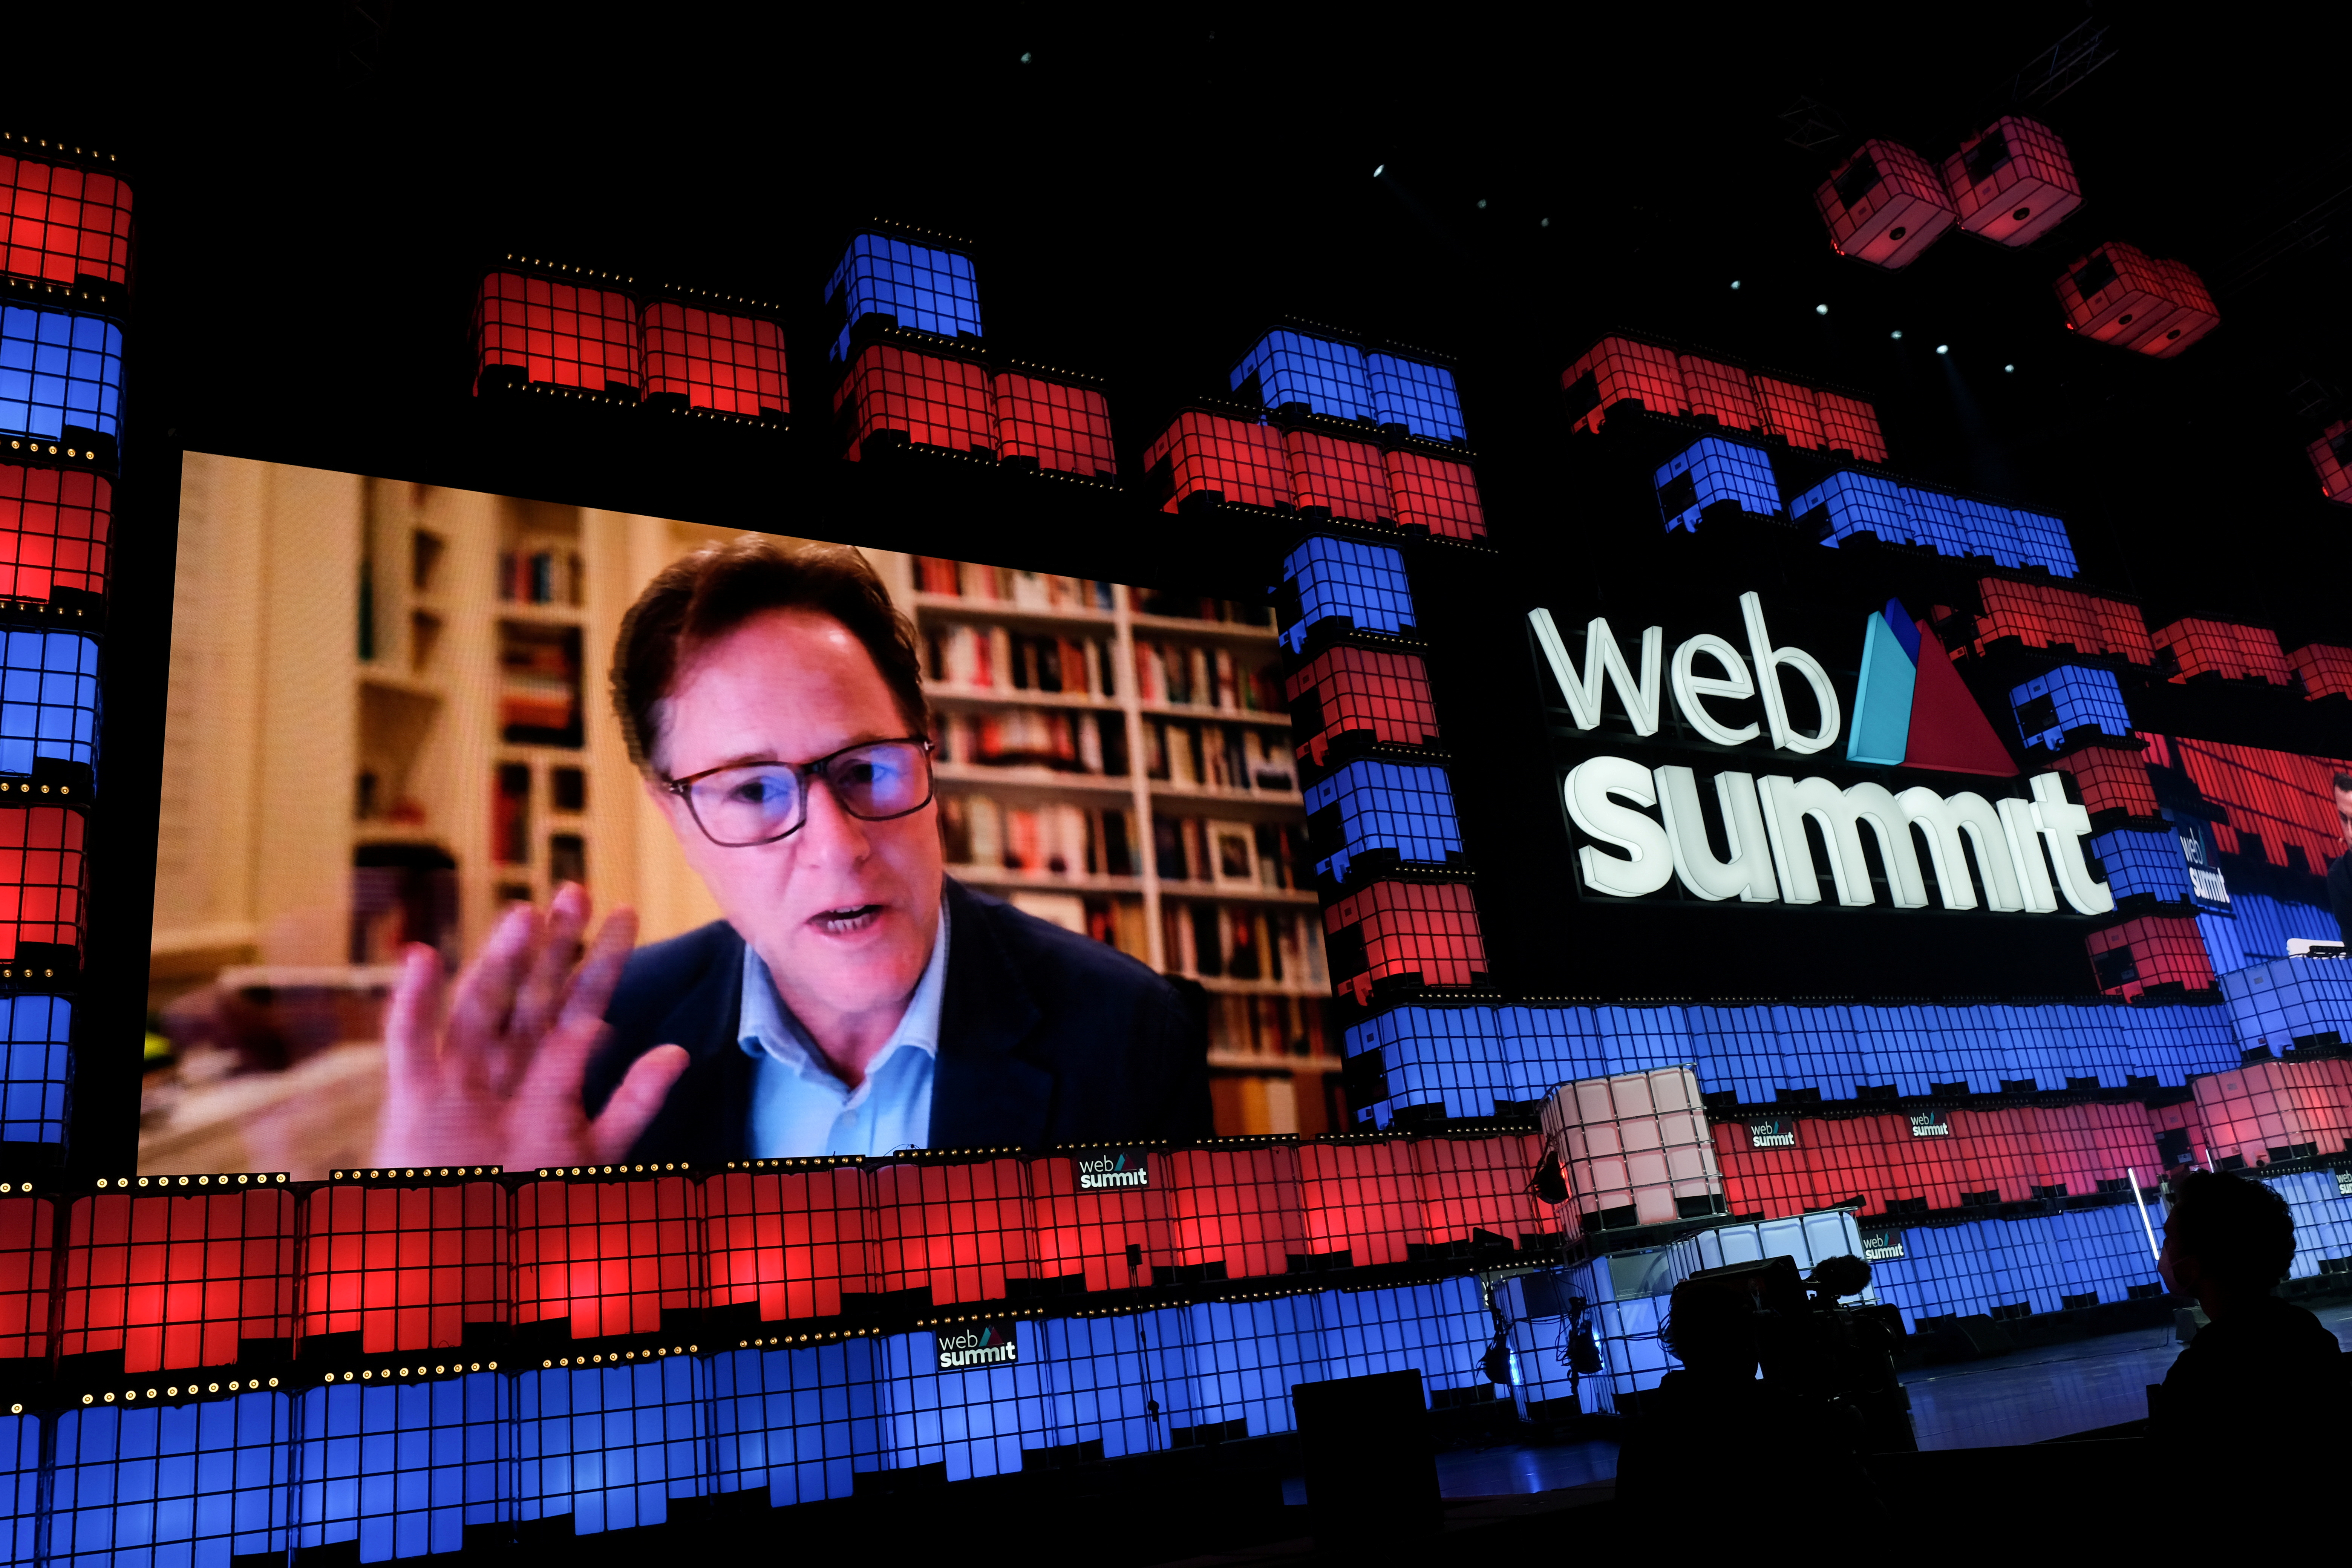 Nick Clegg, VP of Global Affairs & Communications at Meta (Facebook), participates remotely in the Web Summit, Europe's largest technology conference, in Lisbon, Portugal, November 2, 2021. REUTERS/Pedro Nunes